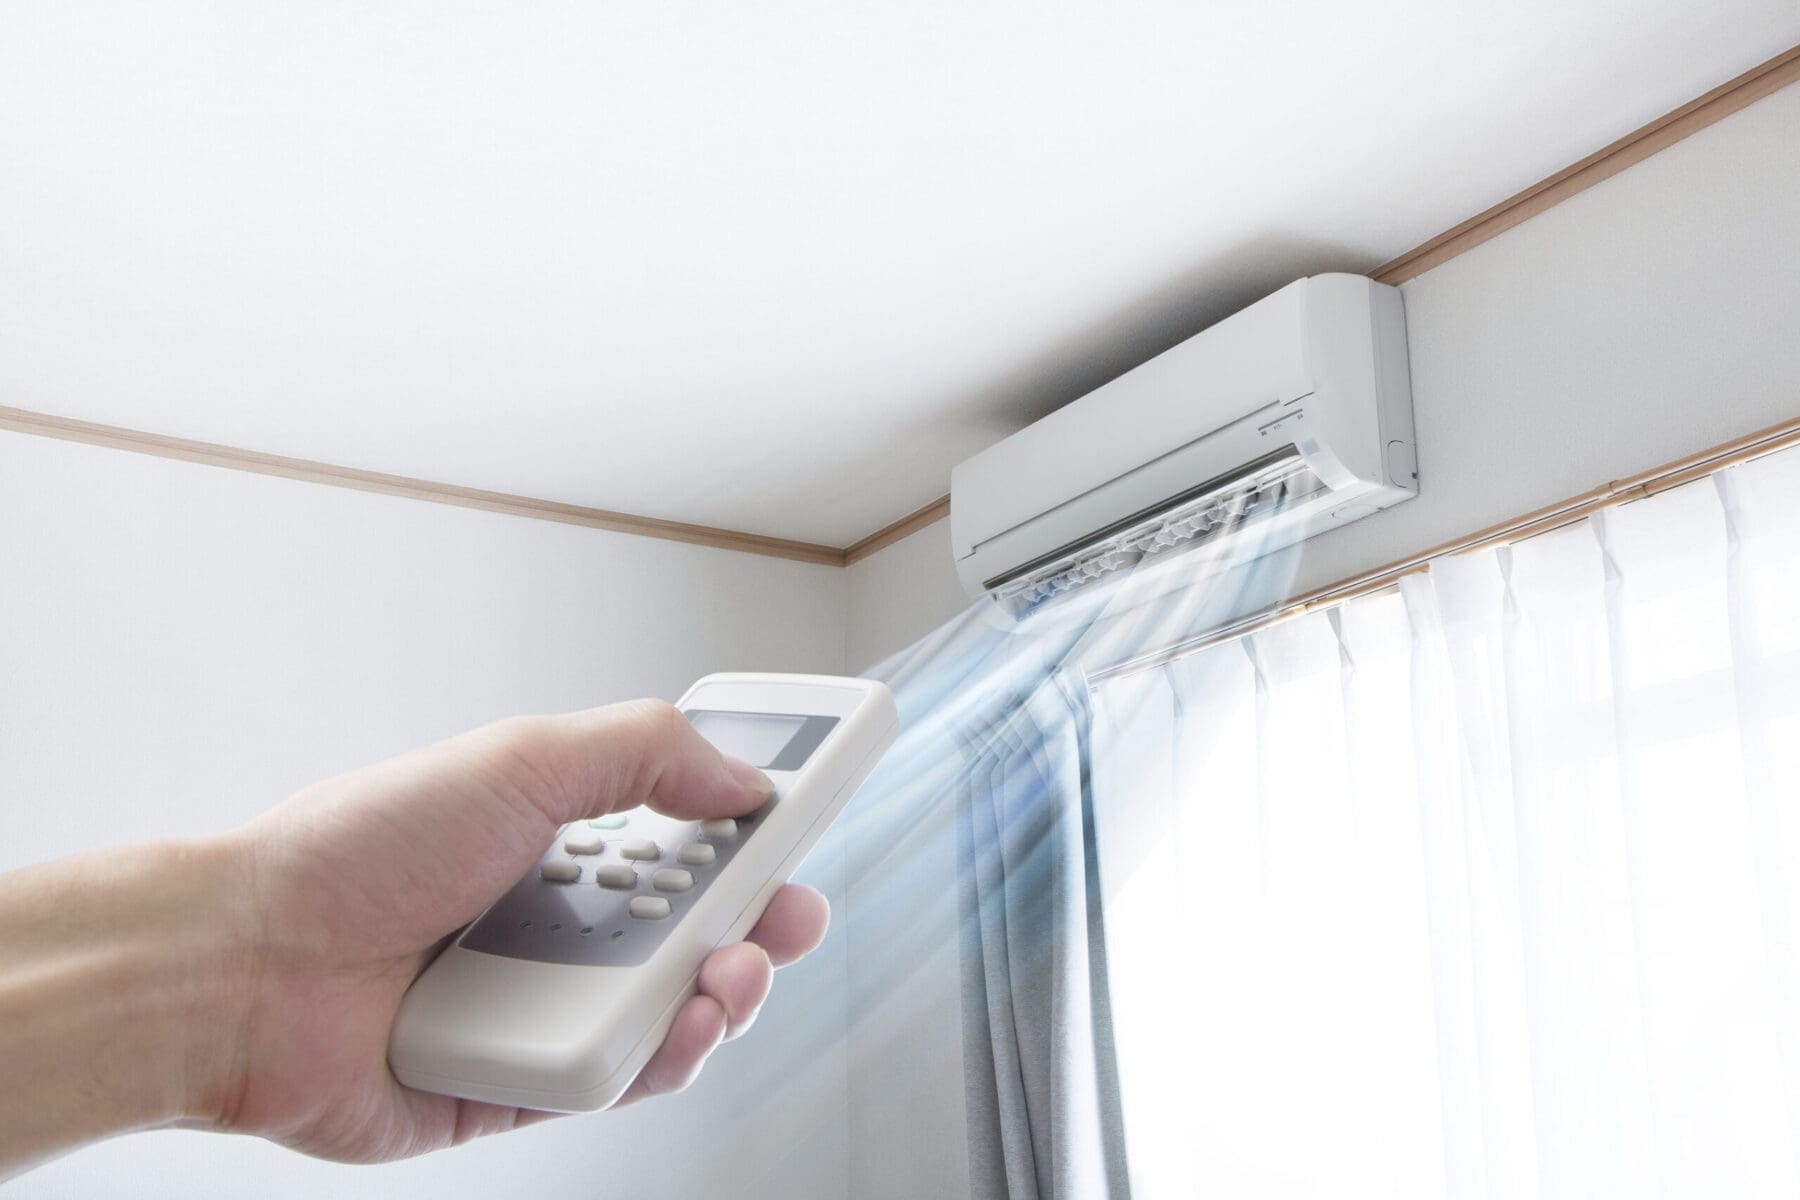 Hand pointing at a ductless mini-split with a remote to turn the unit on